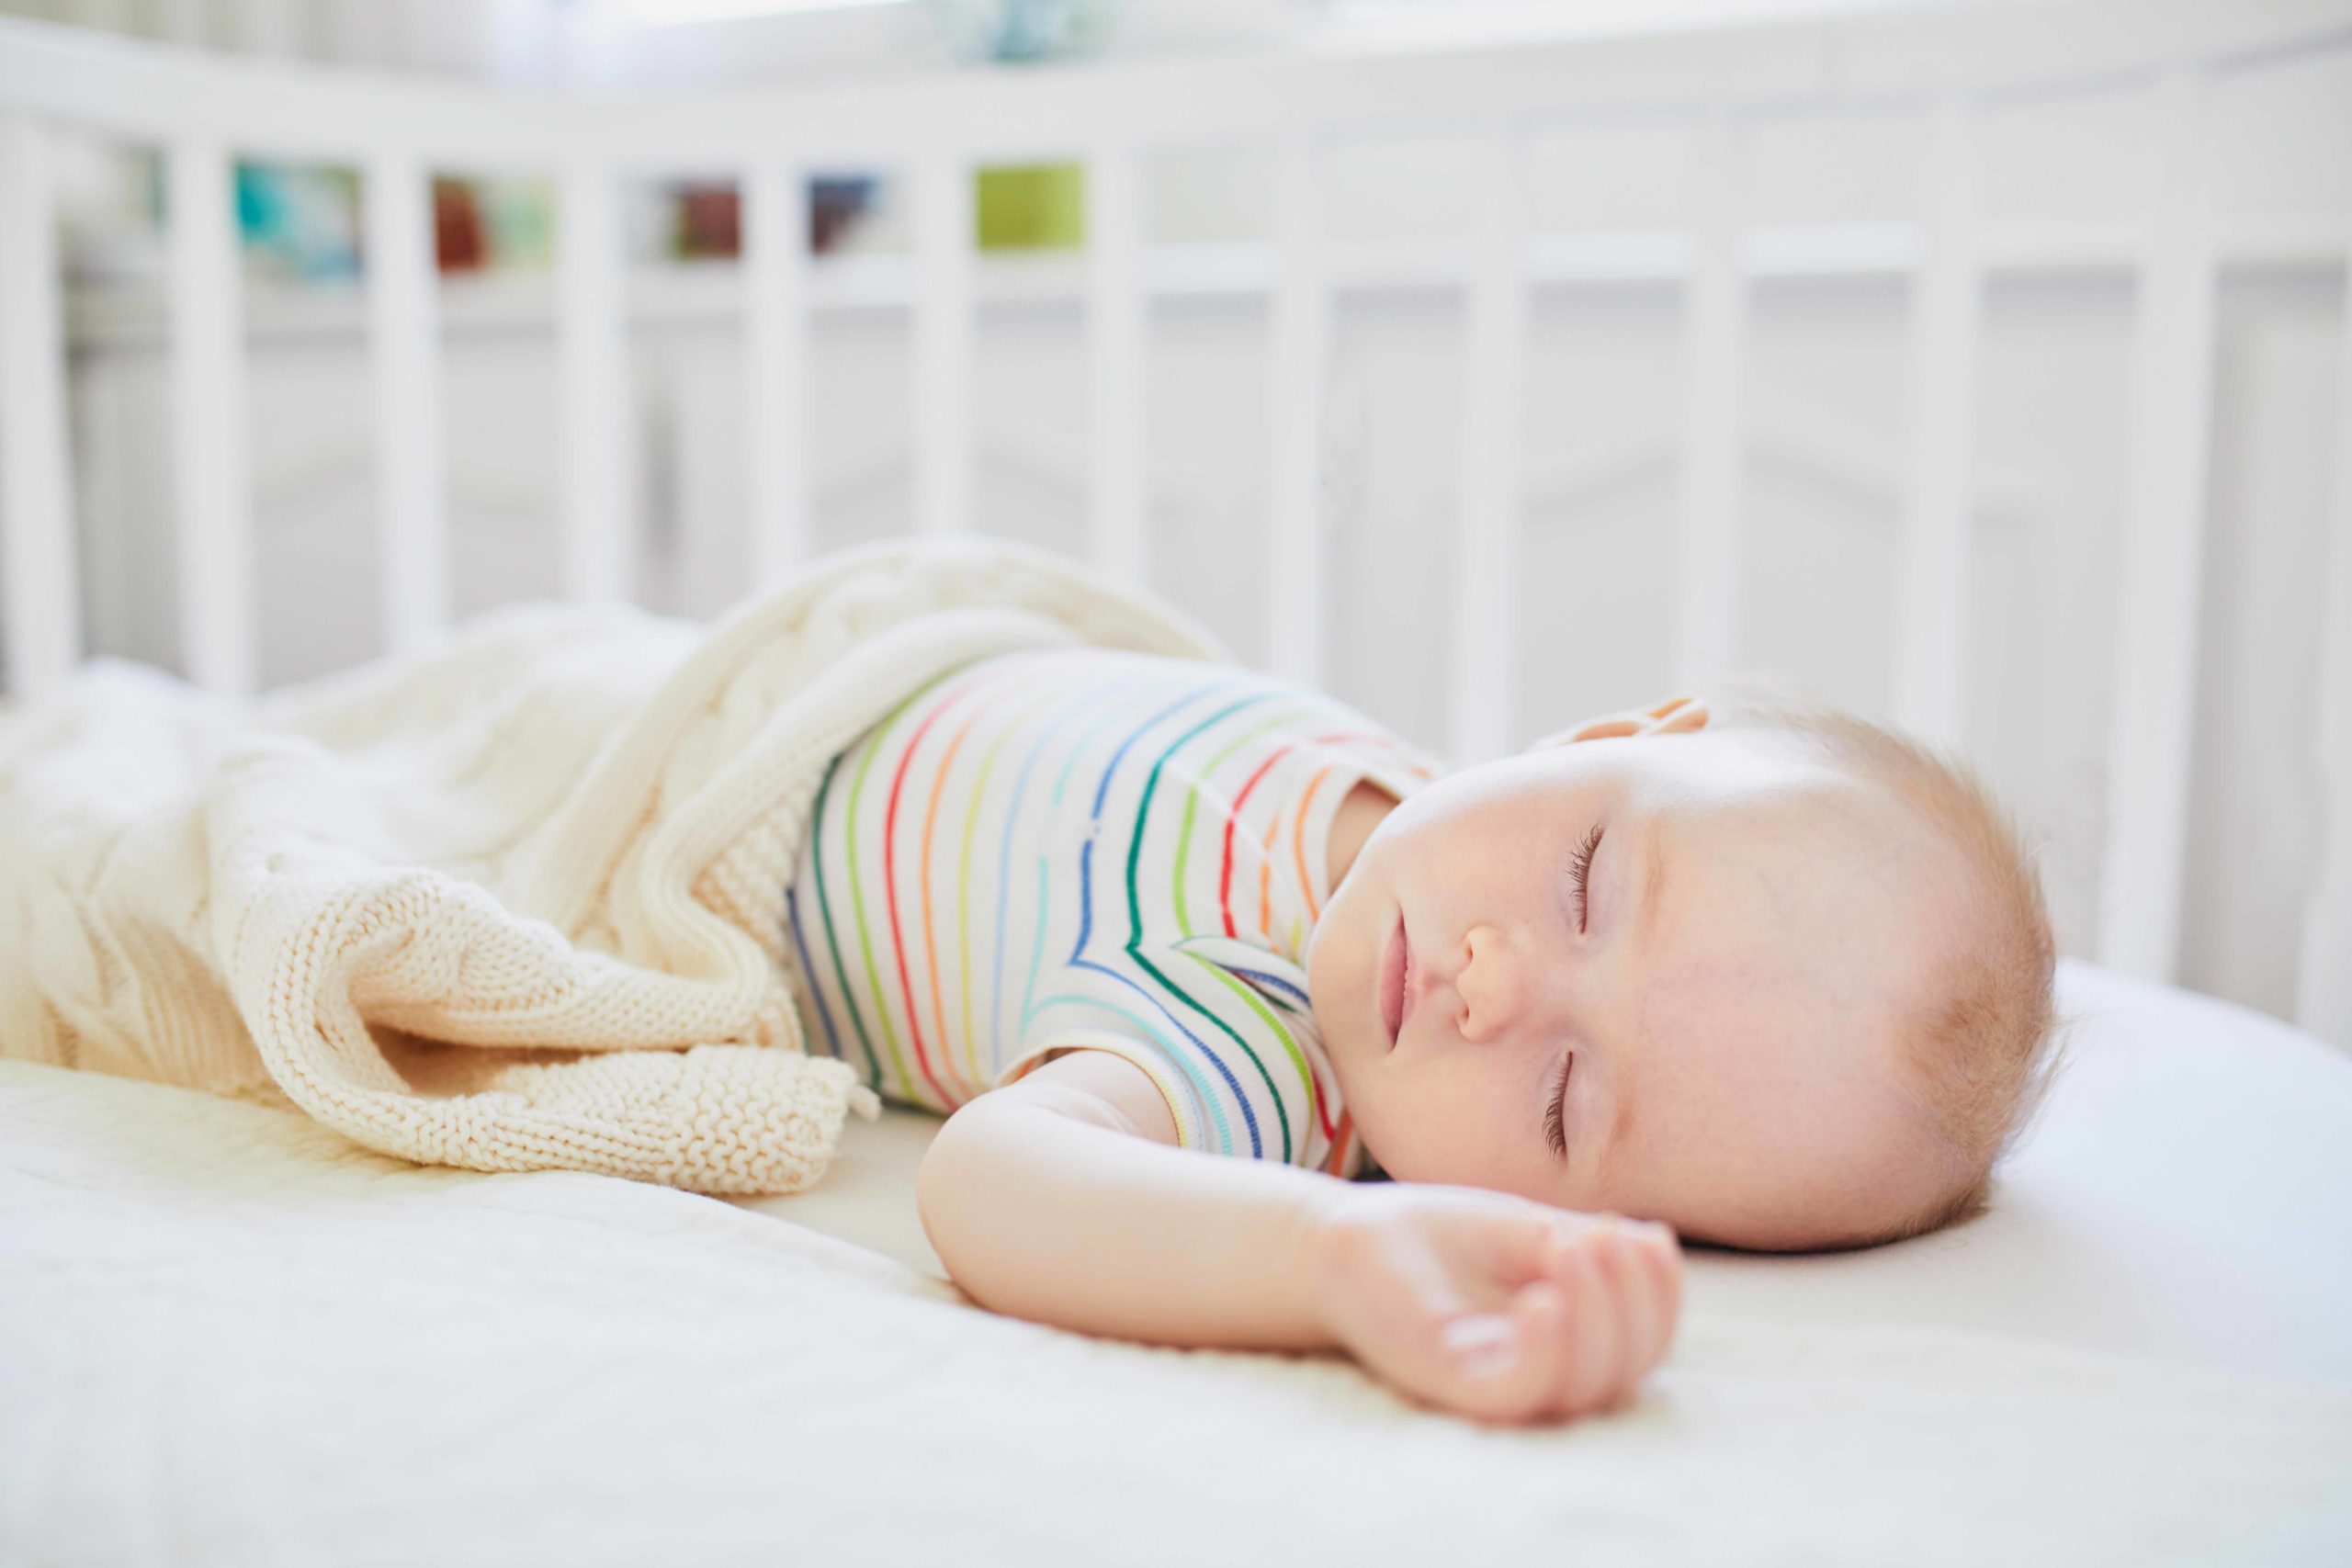 Adorable baby girl sleeping in co-sleeper crib attached to parents' bed. Little child having a day nap in cot. Sleep training concept. Infant kid in sunny nursery